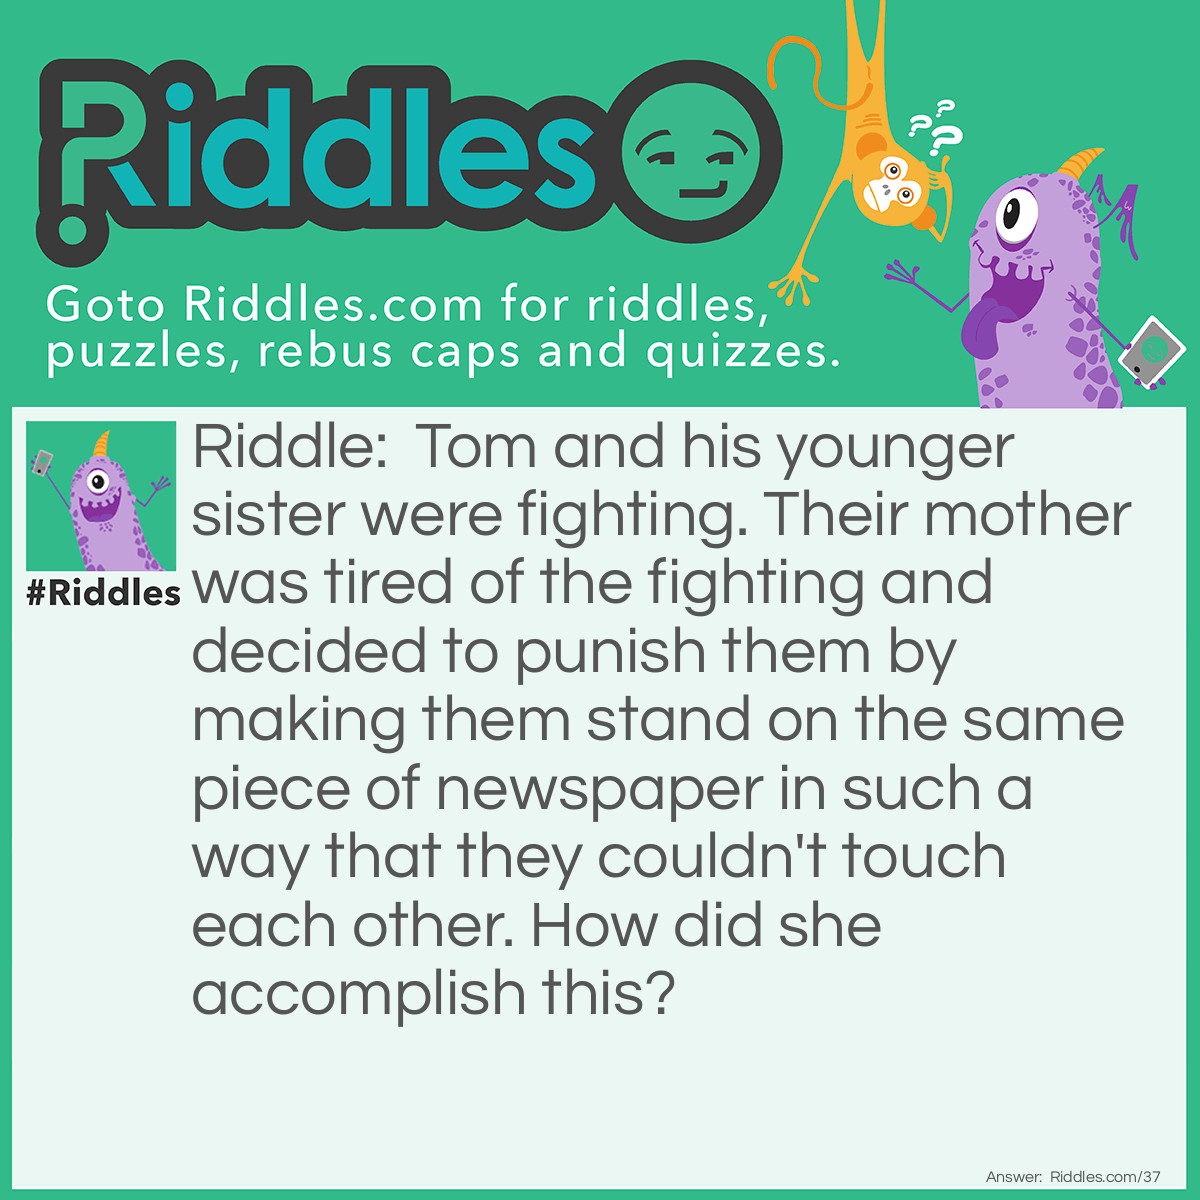 Riddle: Tom and his younger sister were fighting. Their mother was tired of the fighting and decided to punish them by making them stand on the same piece of newspaper in such a way that they couldn't touch each other. How did she accomplish this? Answer: Tom's mother slid a newspaper under a door, each sibling standing on each side.